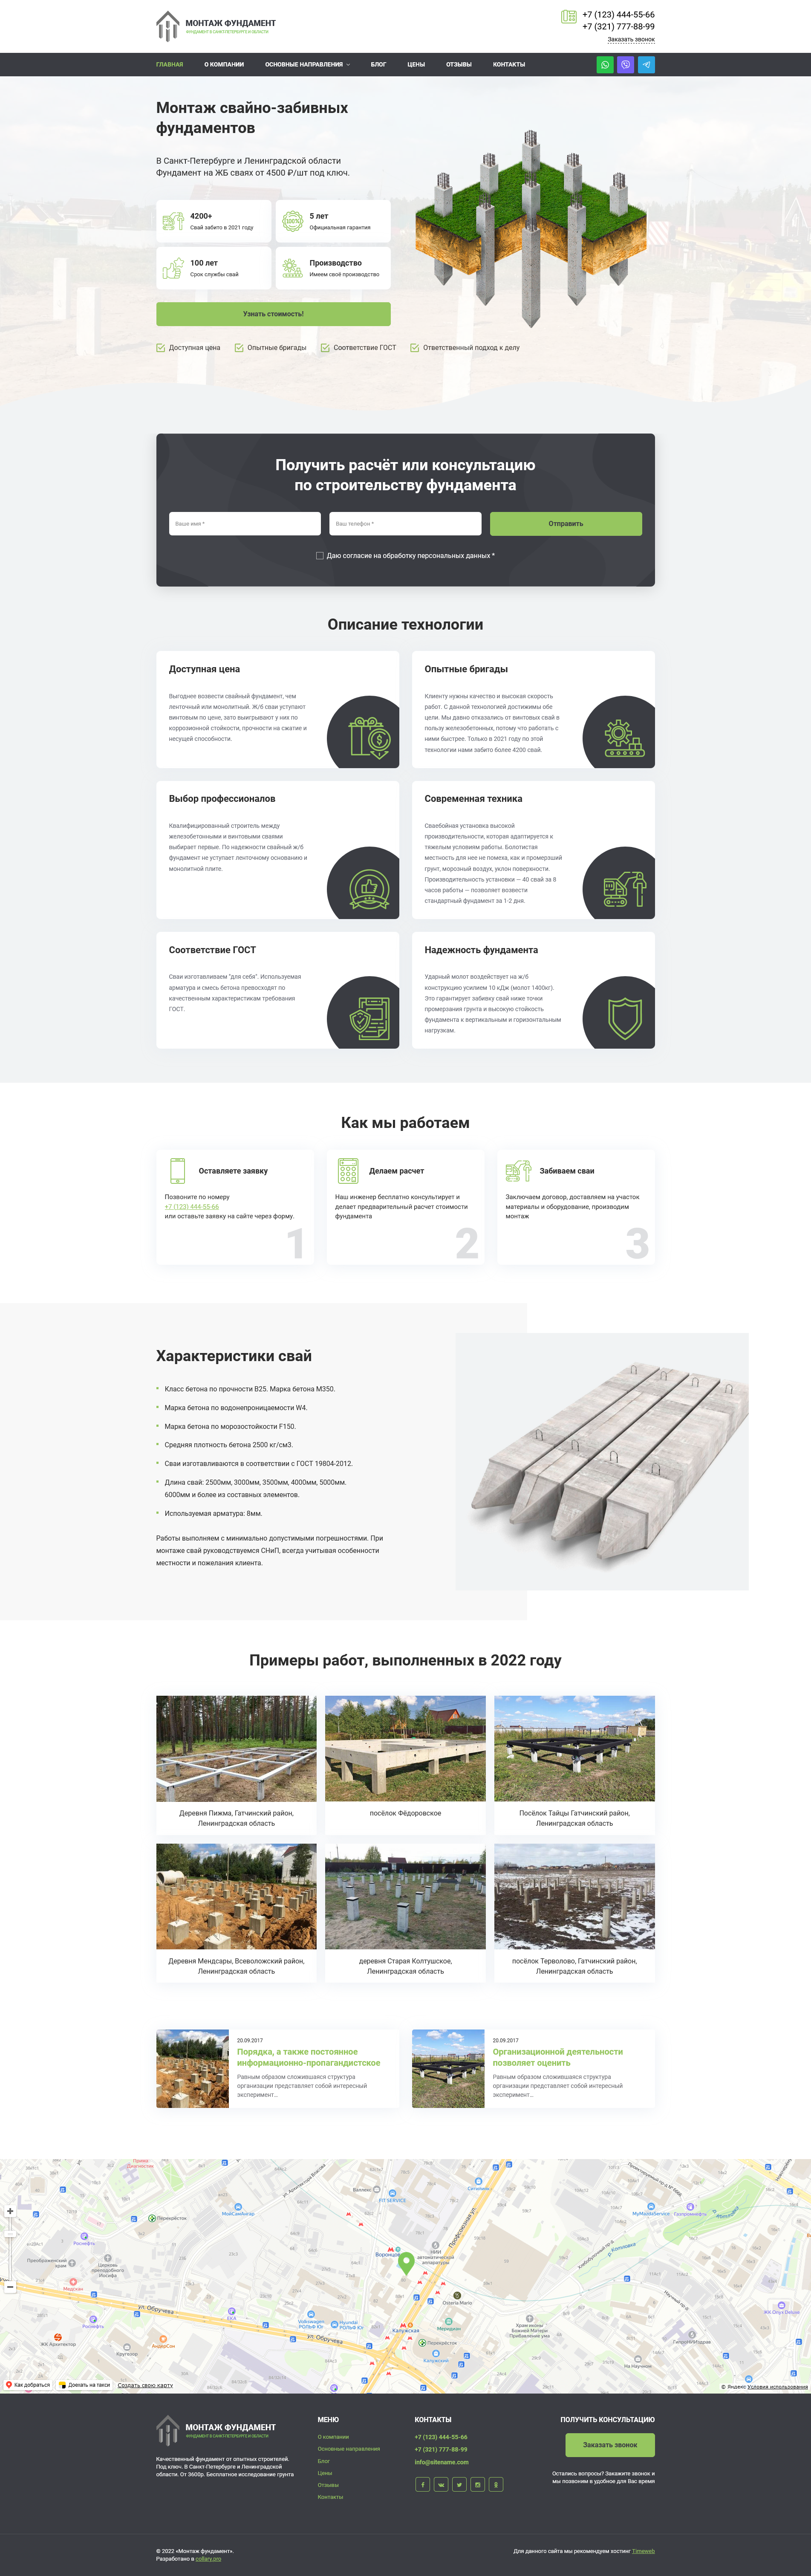 Landscape and Nature, Business card website MODx Template